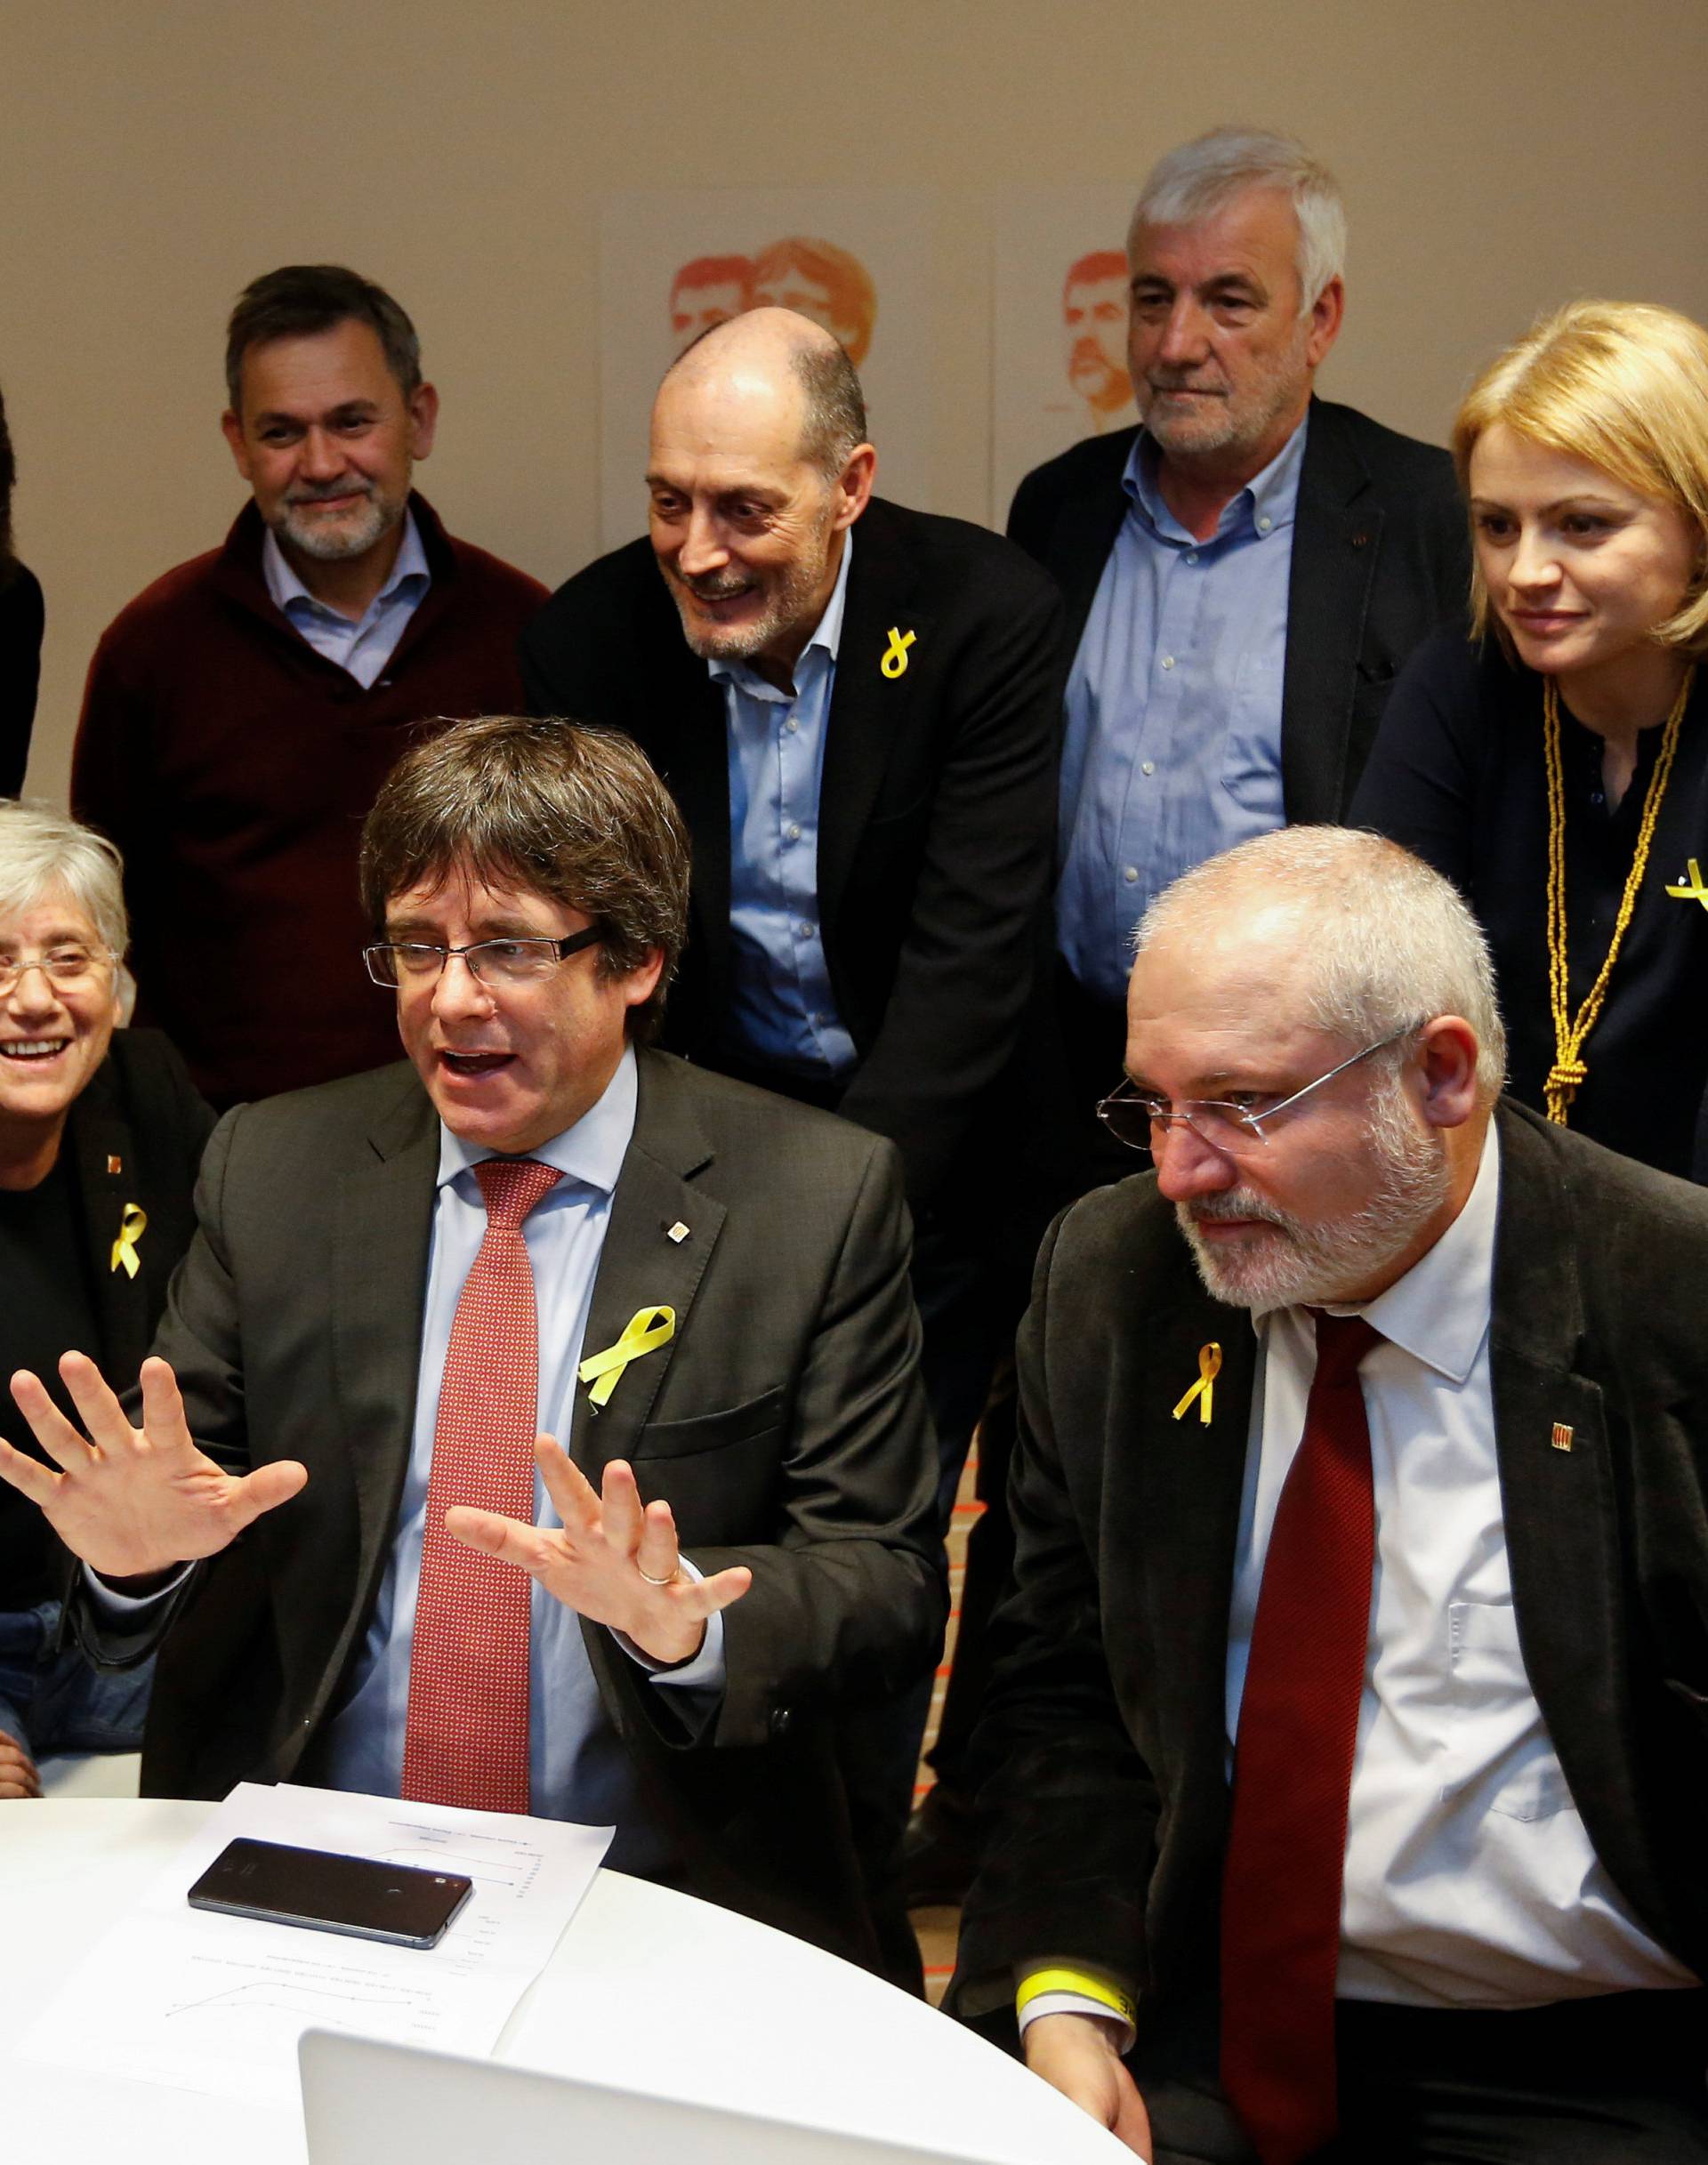 Carles Puigdemont, dismissed President of Catalonia, reacts while viewing results in Catalonia's regional election in Brussels